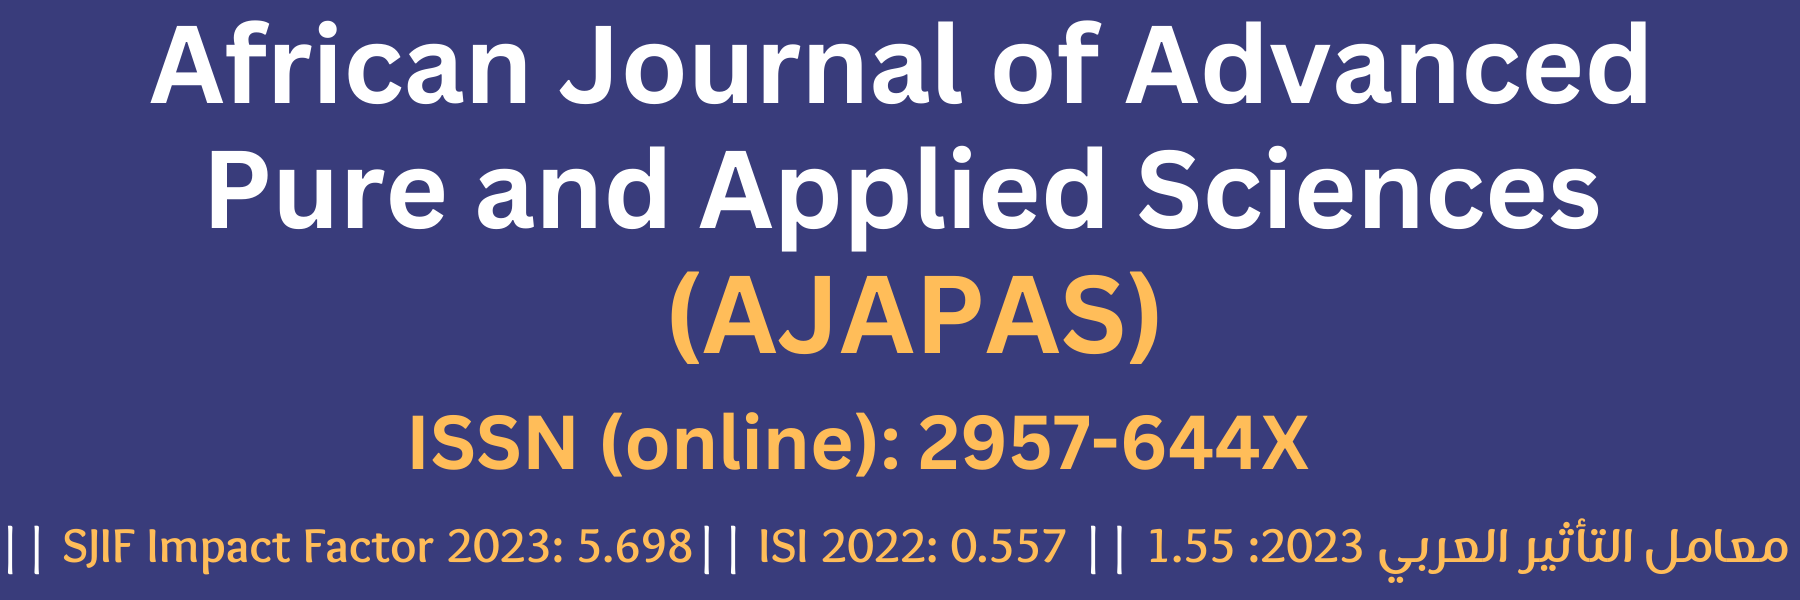 African Journal of Advanced Pure and Applied Sciences, (AJAPAS)